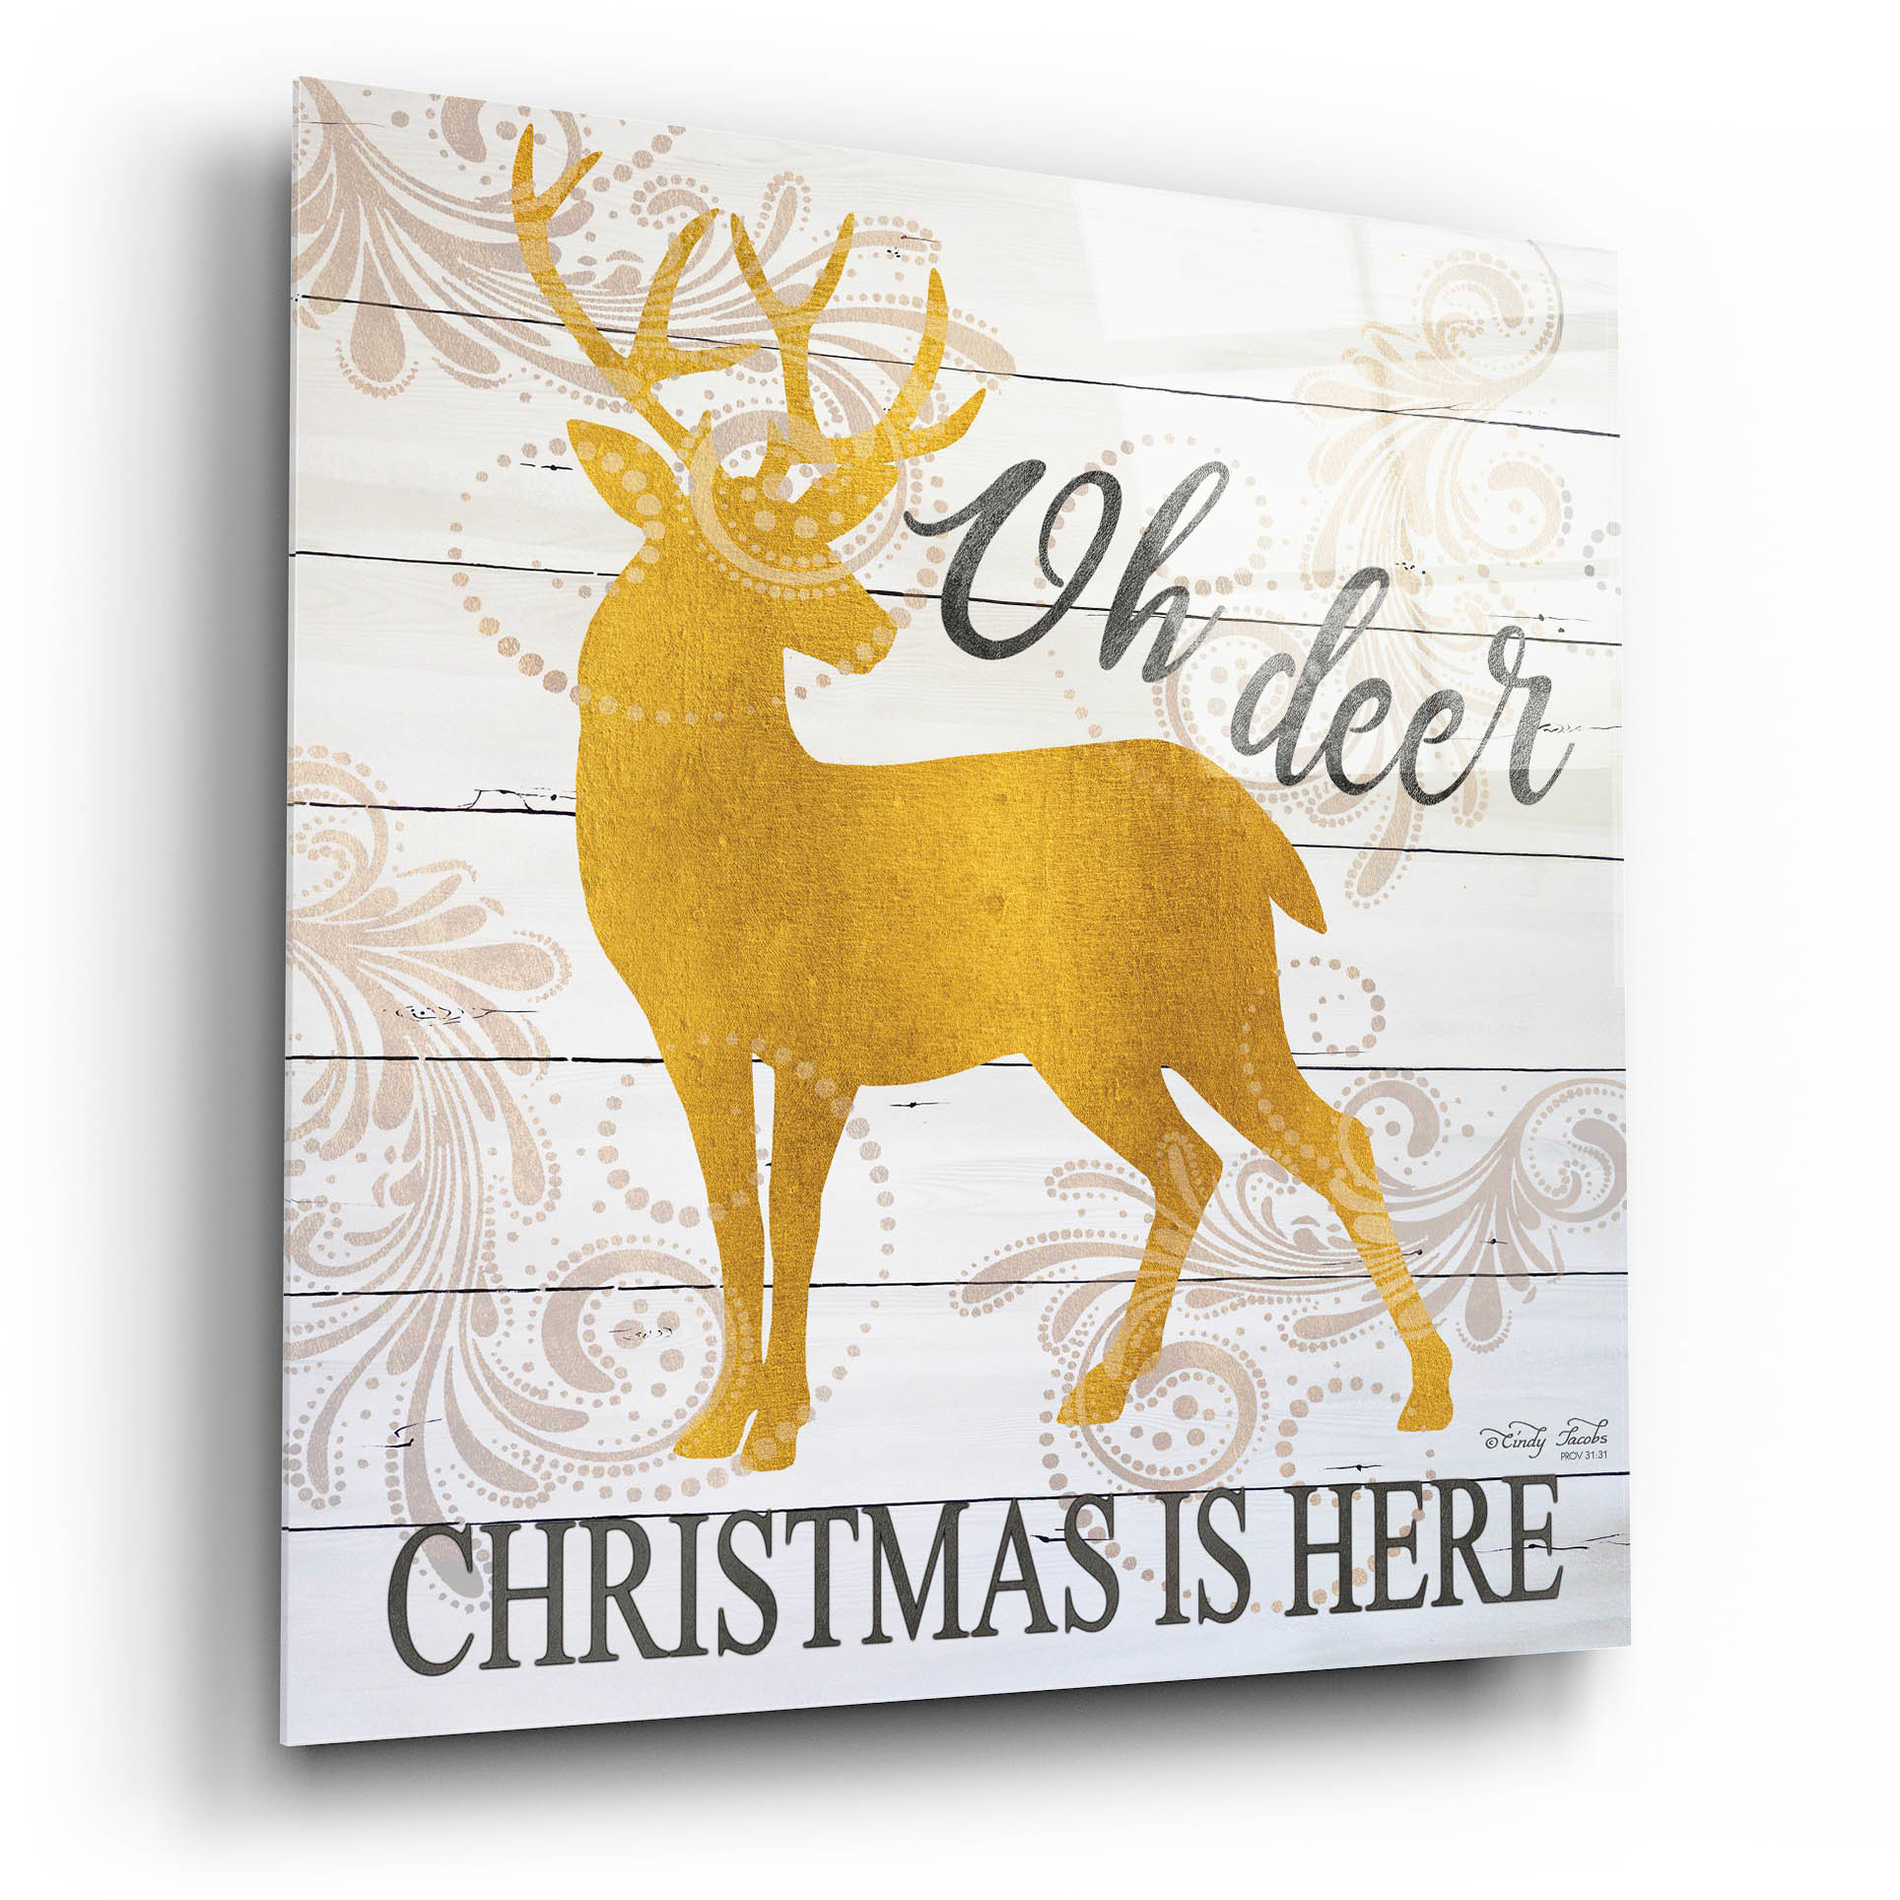 Epic Art 'Oh Deer Christmas is Here' by Cindy Jacobs, Acrylic Glass Wall Art,12x12